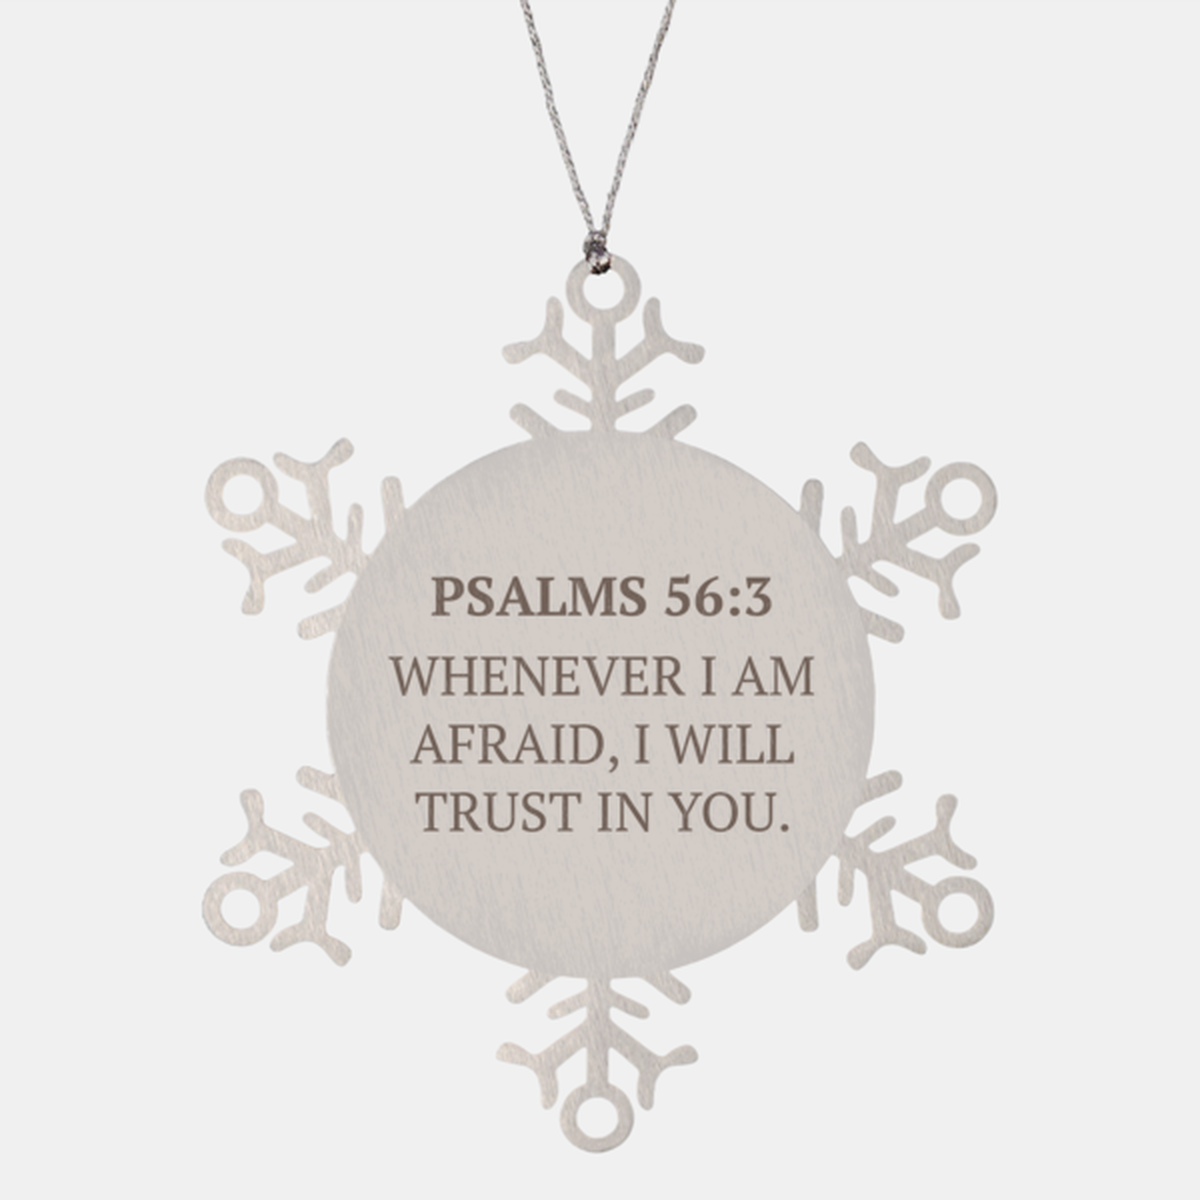 Christian Ornaments For Christmas Tree, Whenever I Am Afraid, I Will Trust In You, Religious Christmas Decorations, Scripture Ornaments Gifts, Bible Verse Ornament